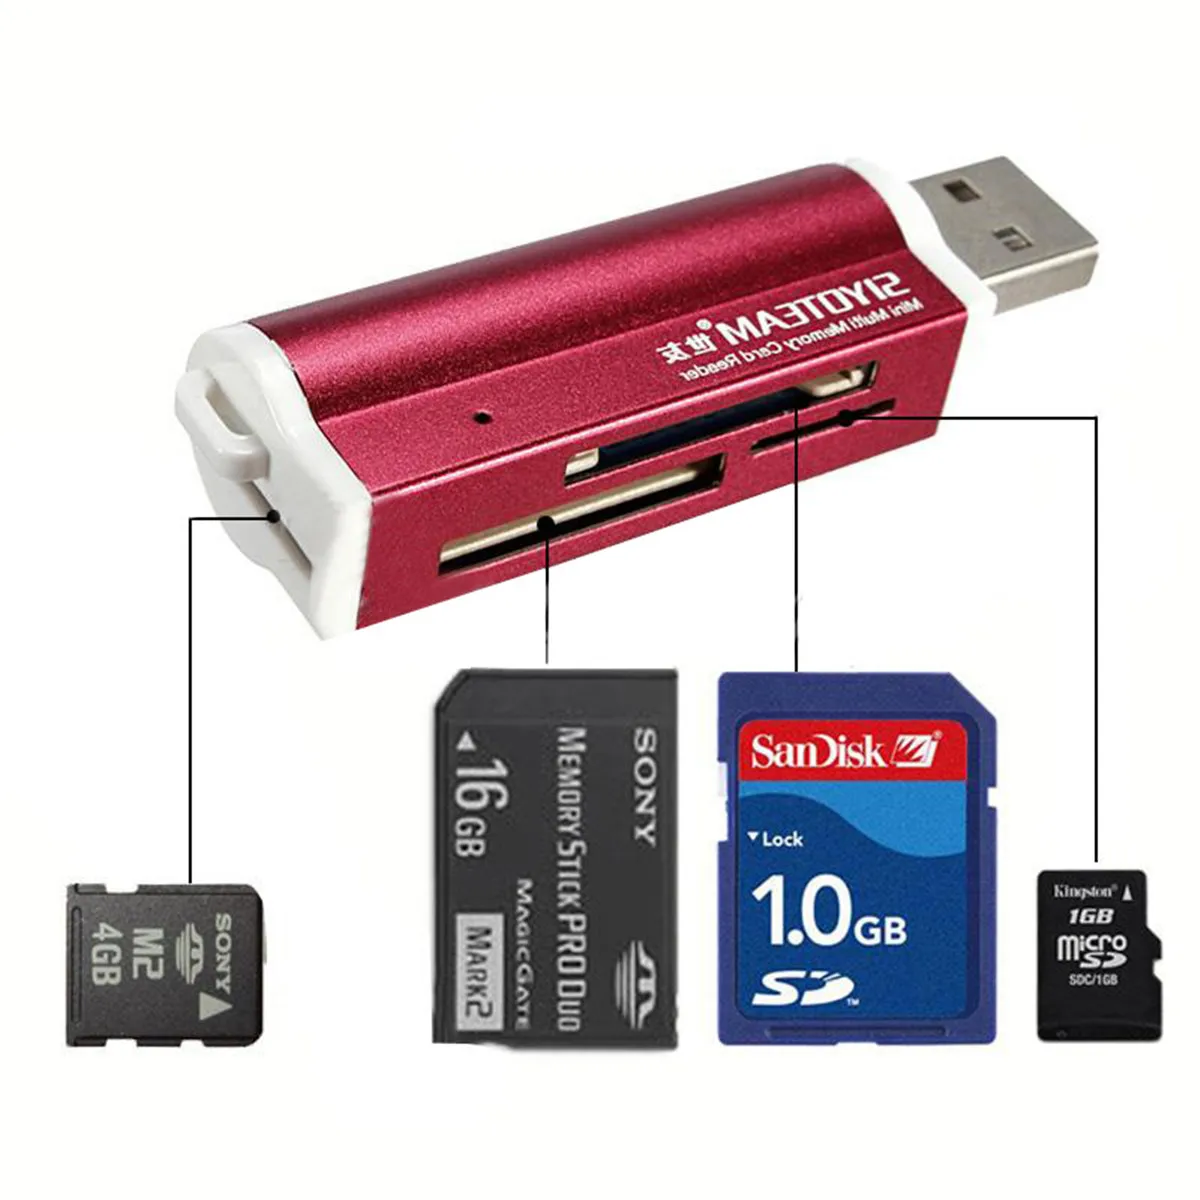 

Newest All in 1 USB 2.0 Multi Memory Card Reader For TF Micro SD MMC SDHC M2 Memory Stick MS Duo RS-MMC + Retail